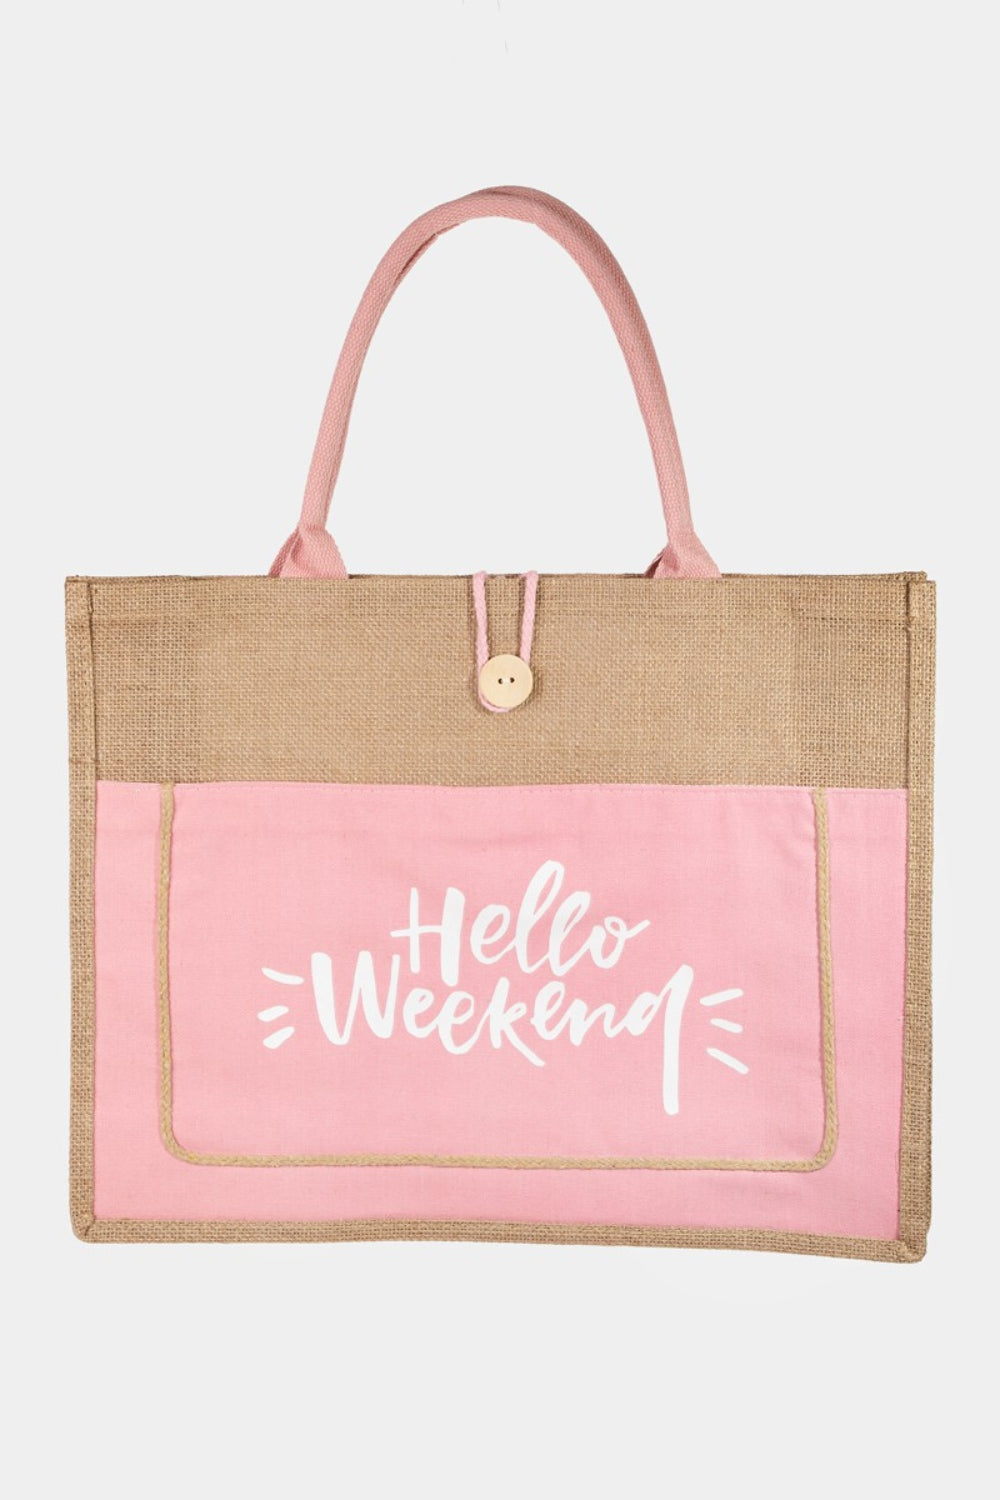 Fame Hello Weekend Burlap Tote Bag Pink One Size Bags JT's Designer Fashion